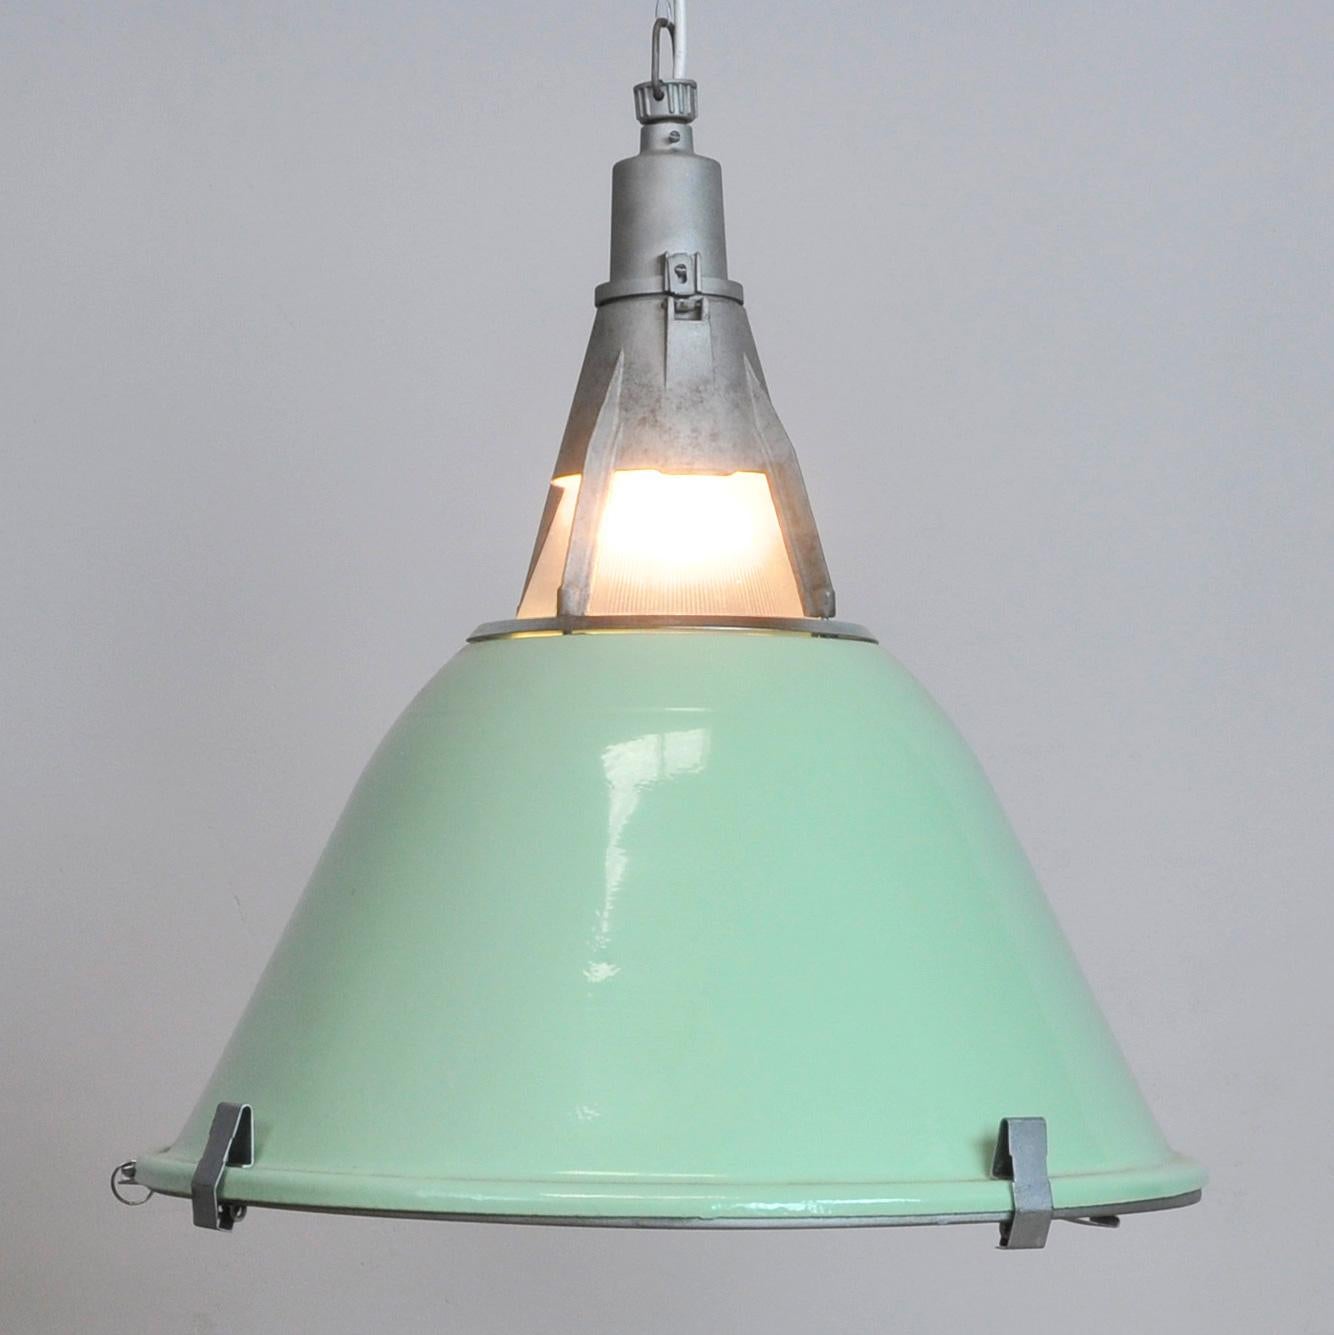 Mint green enameled pendant light from Ukraine with the original prismatic glass on the top. Glass plate on the bottem. Rewired, tested and ready to use.